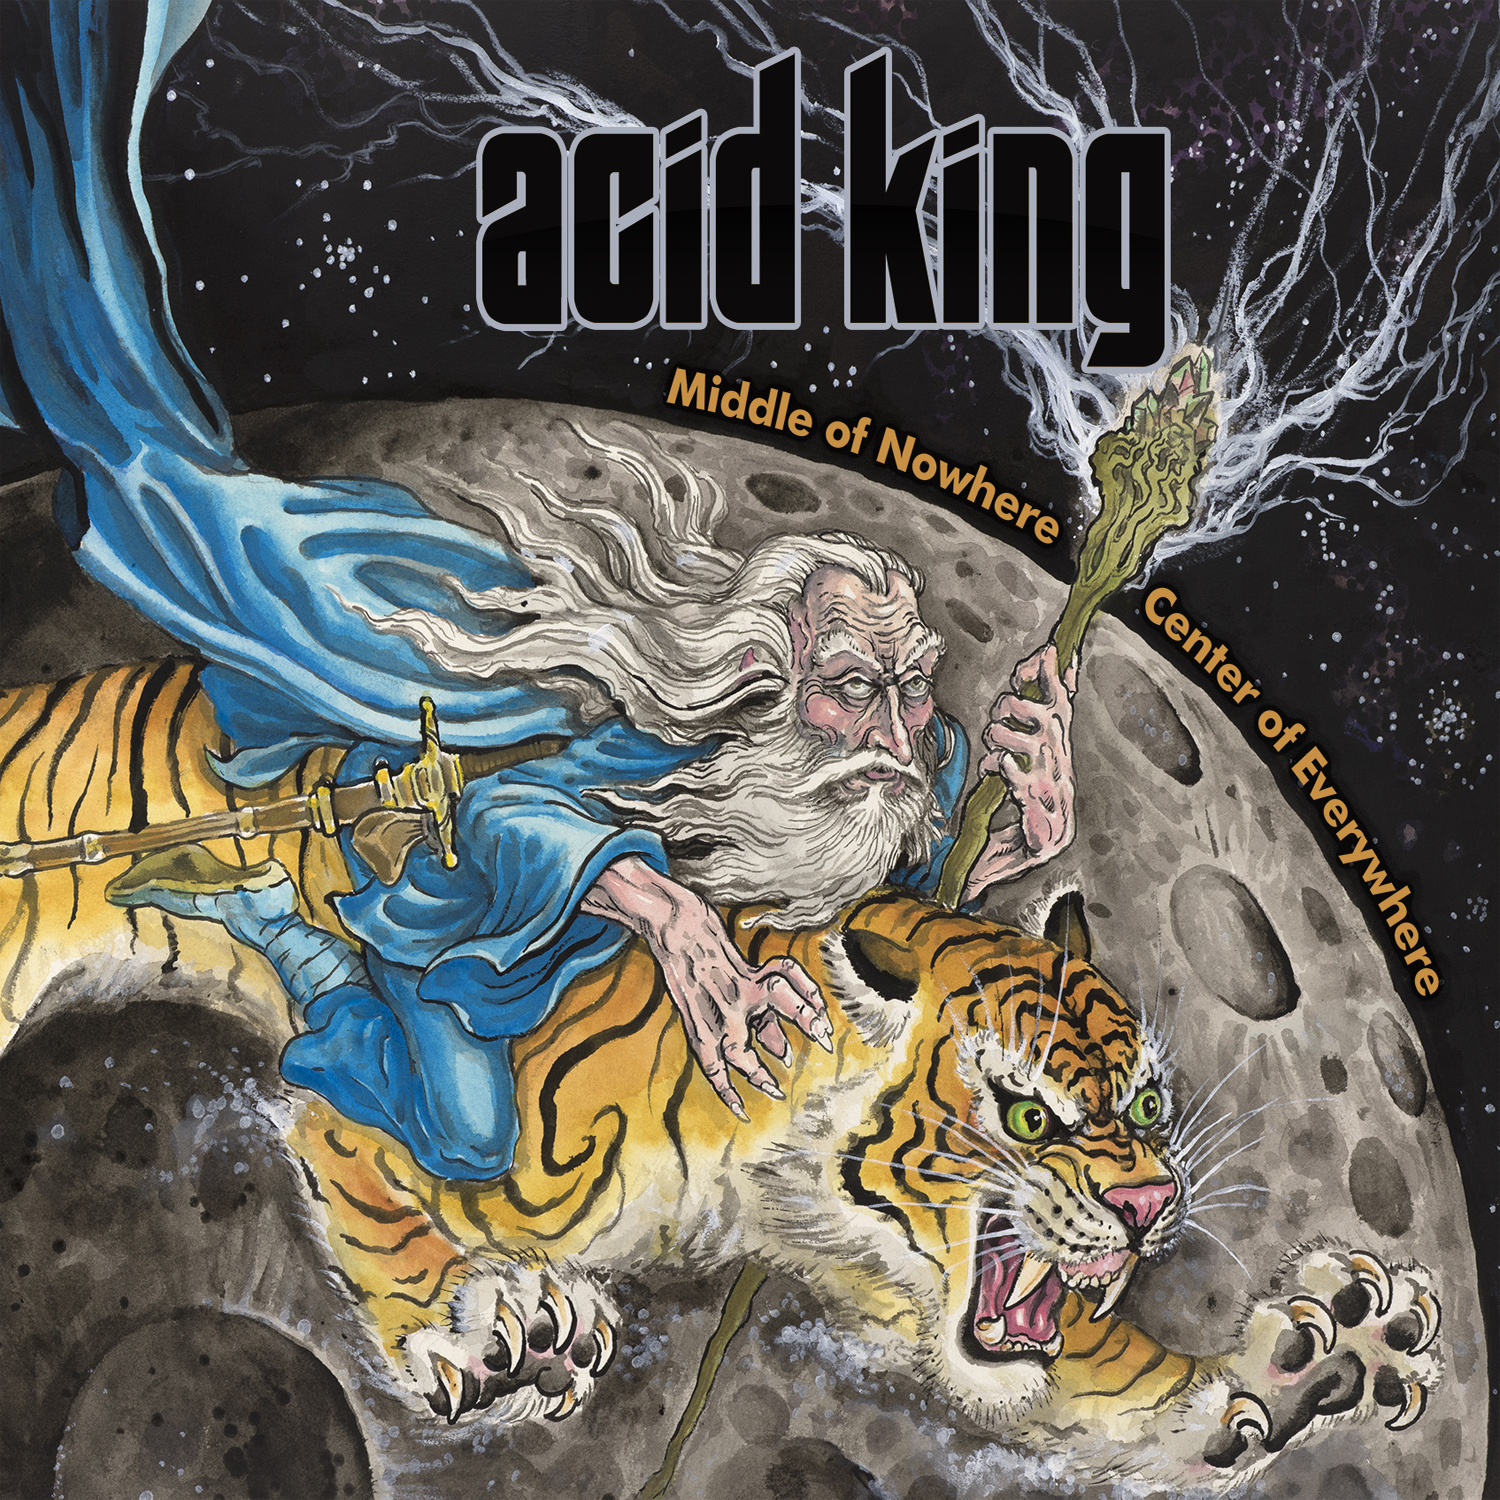 Acid King – Middle of Nowhere, Center of Everywhere Review